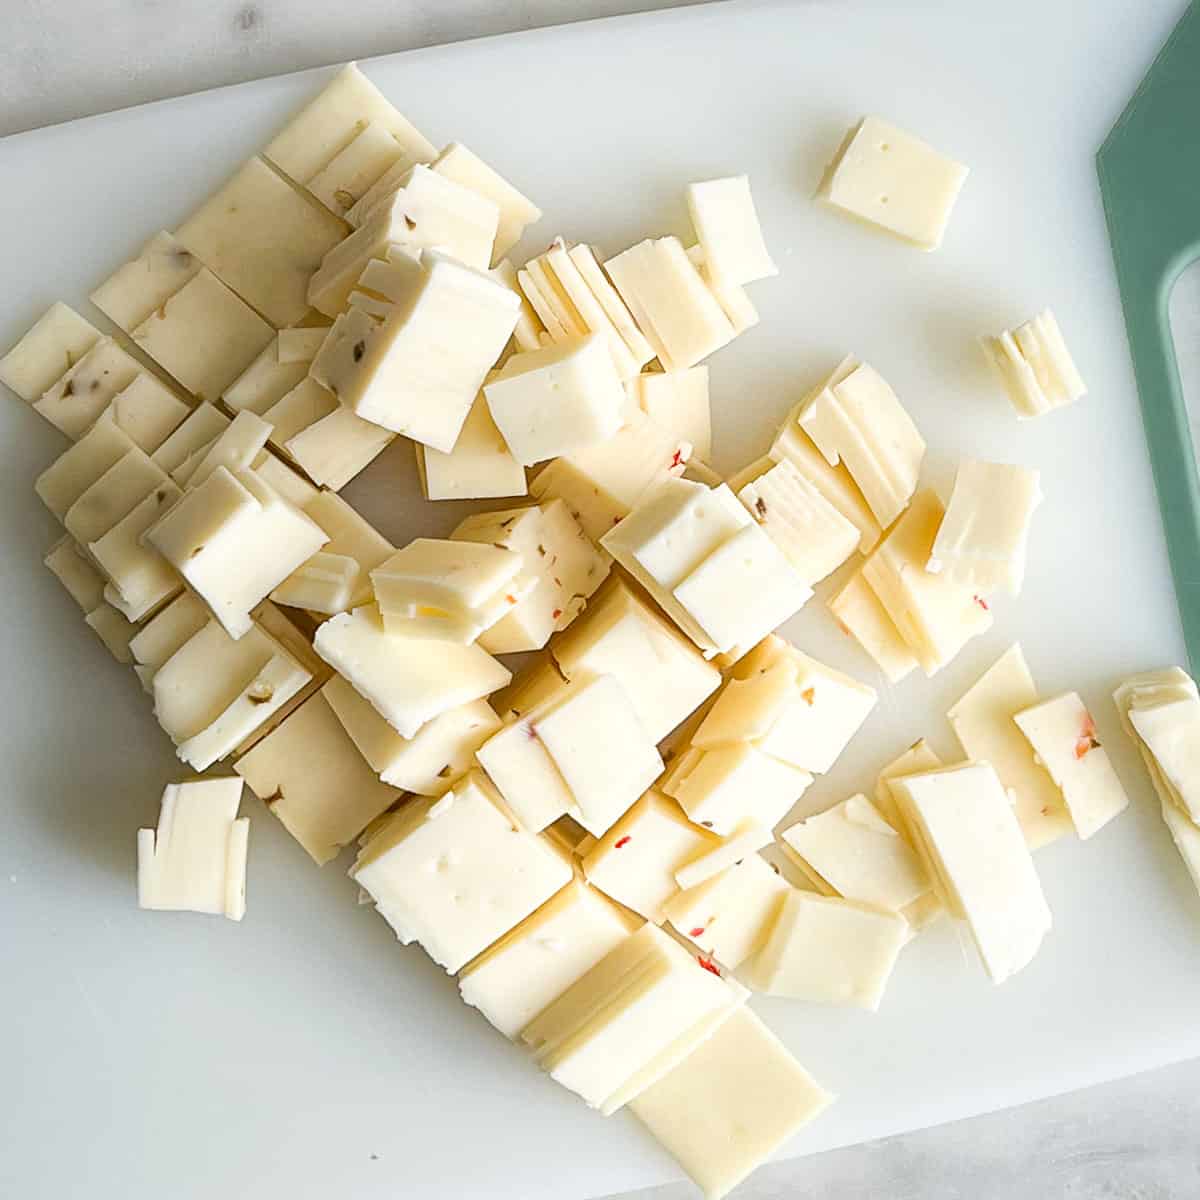 Diced cheese on a white cutting board.